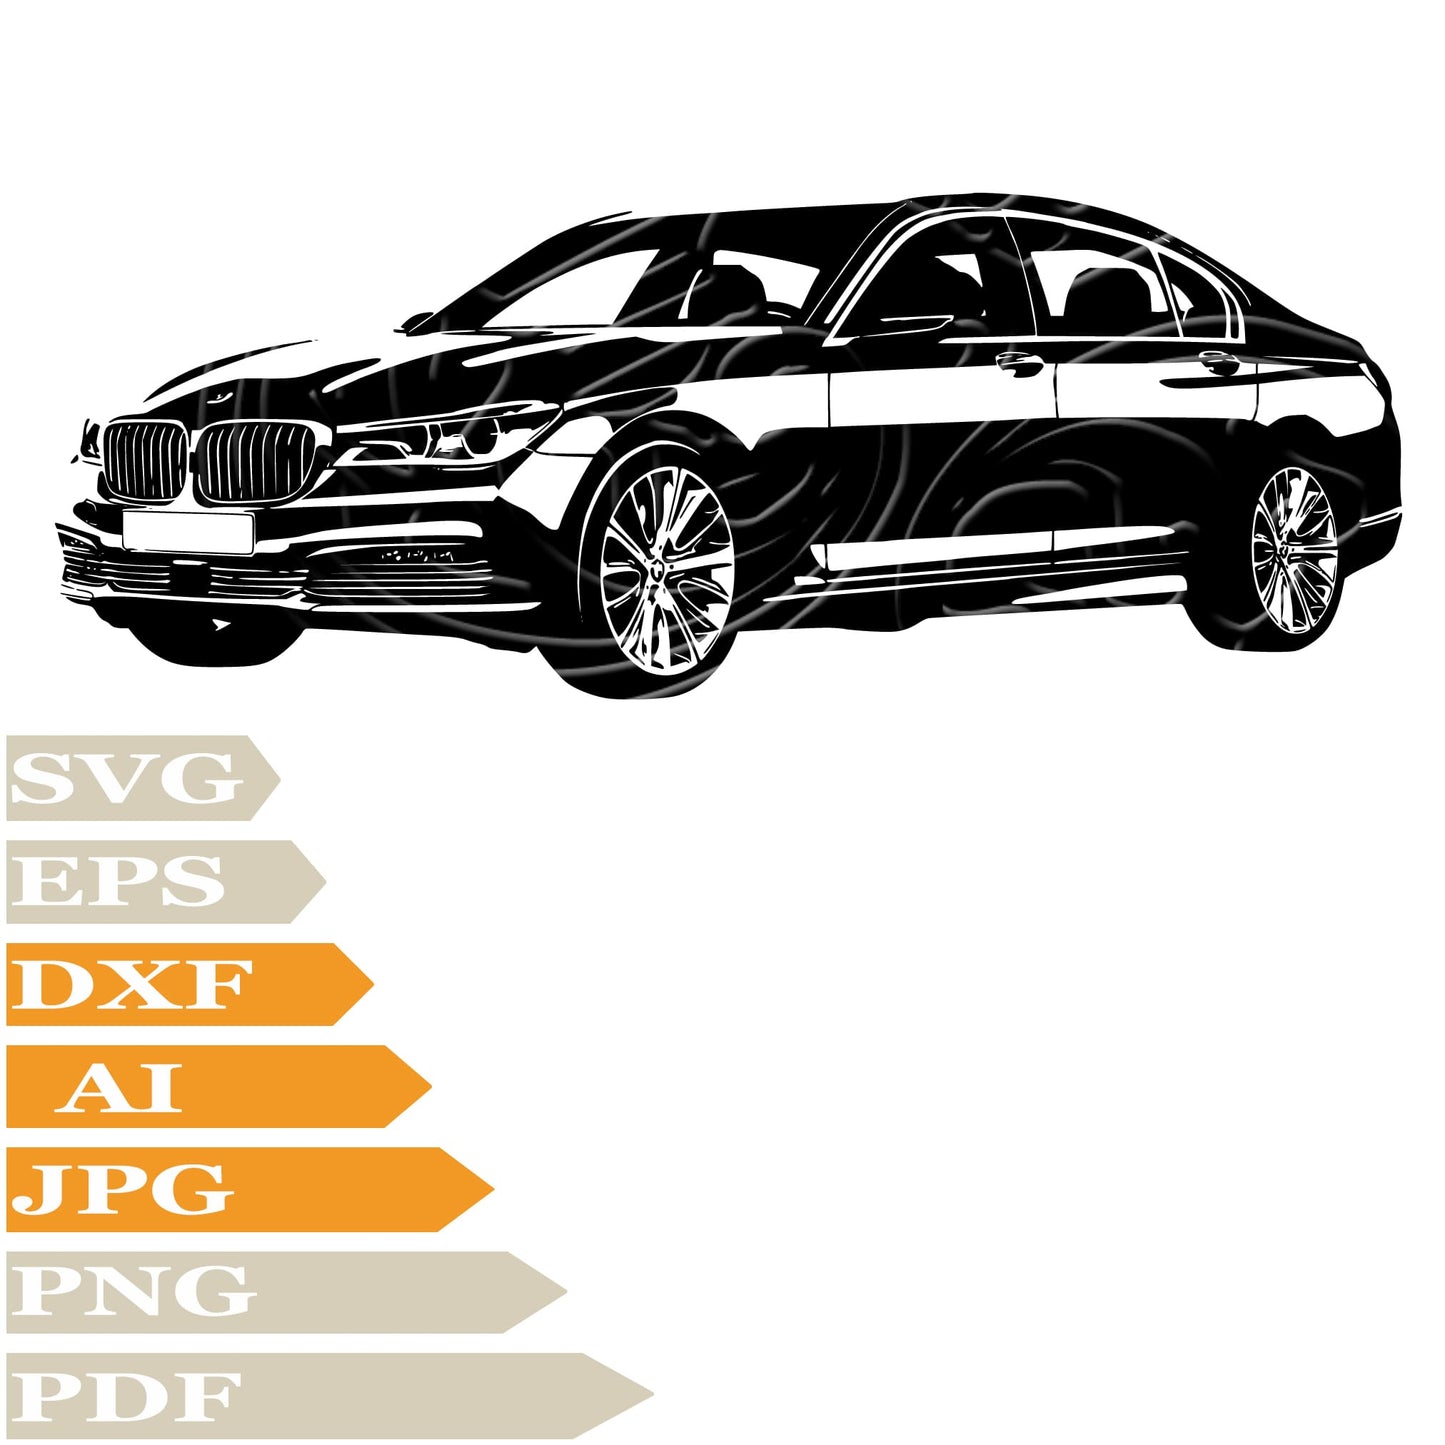 BMW, Sport Car BMW Svg File, Image Cut, Png, For Tattoo, Silhouette, Digital Vector Download, Cut File, Clipart, For Cricut